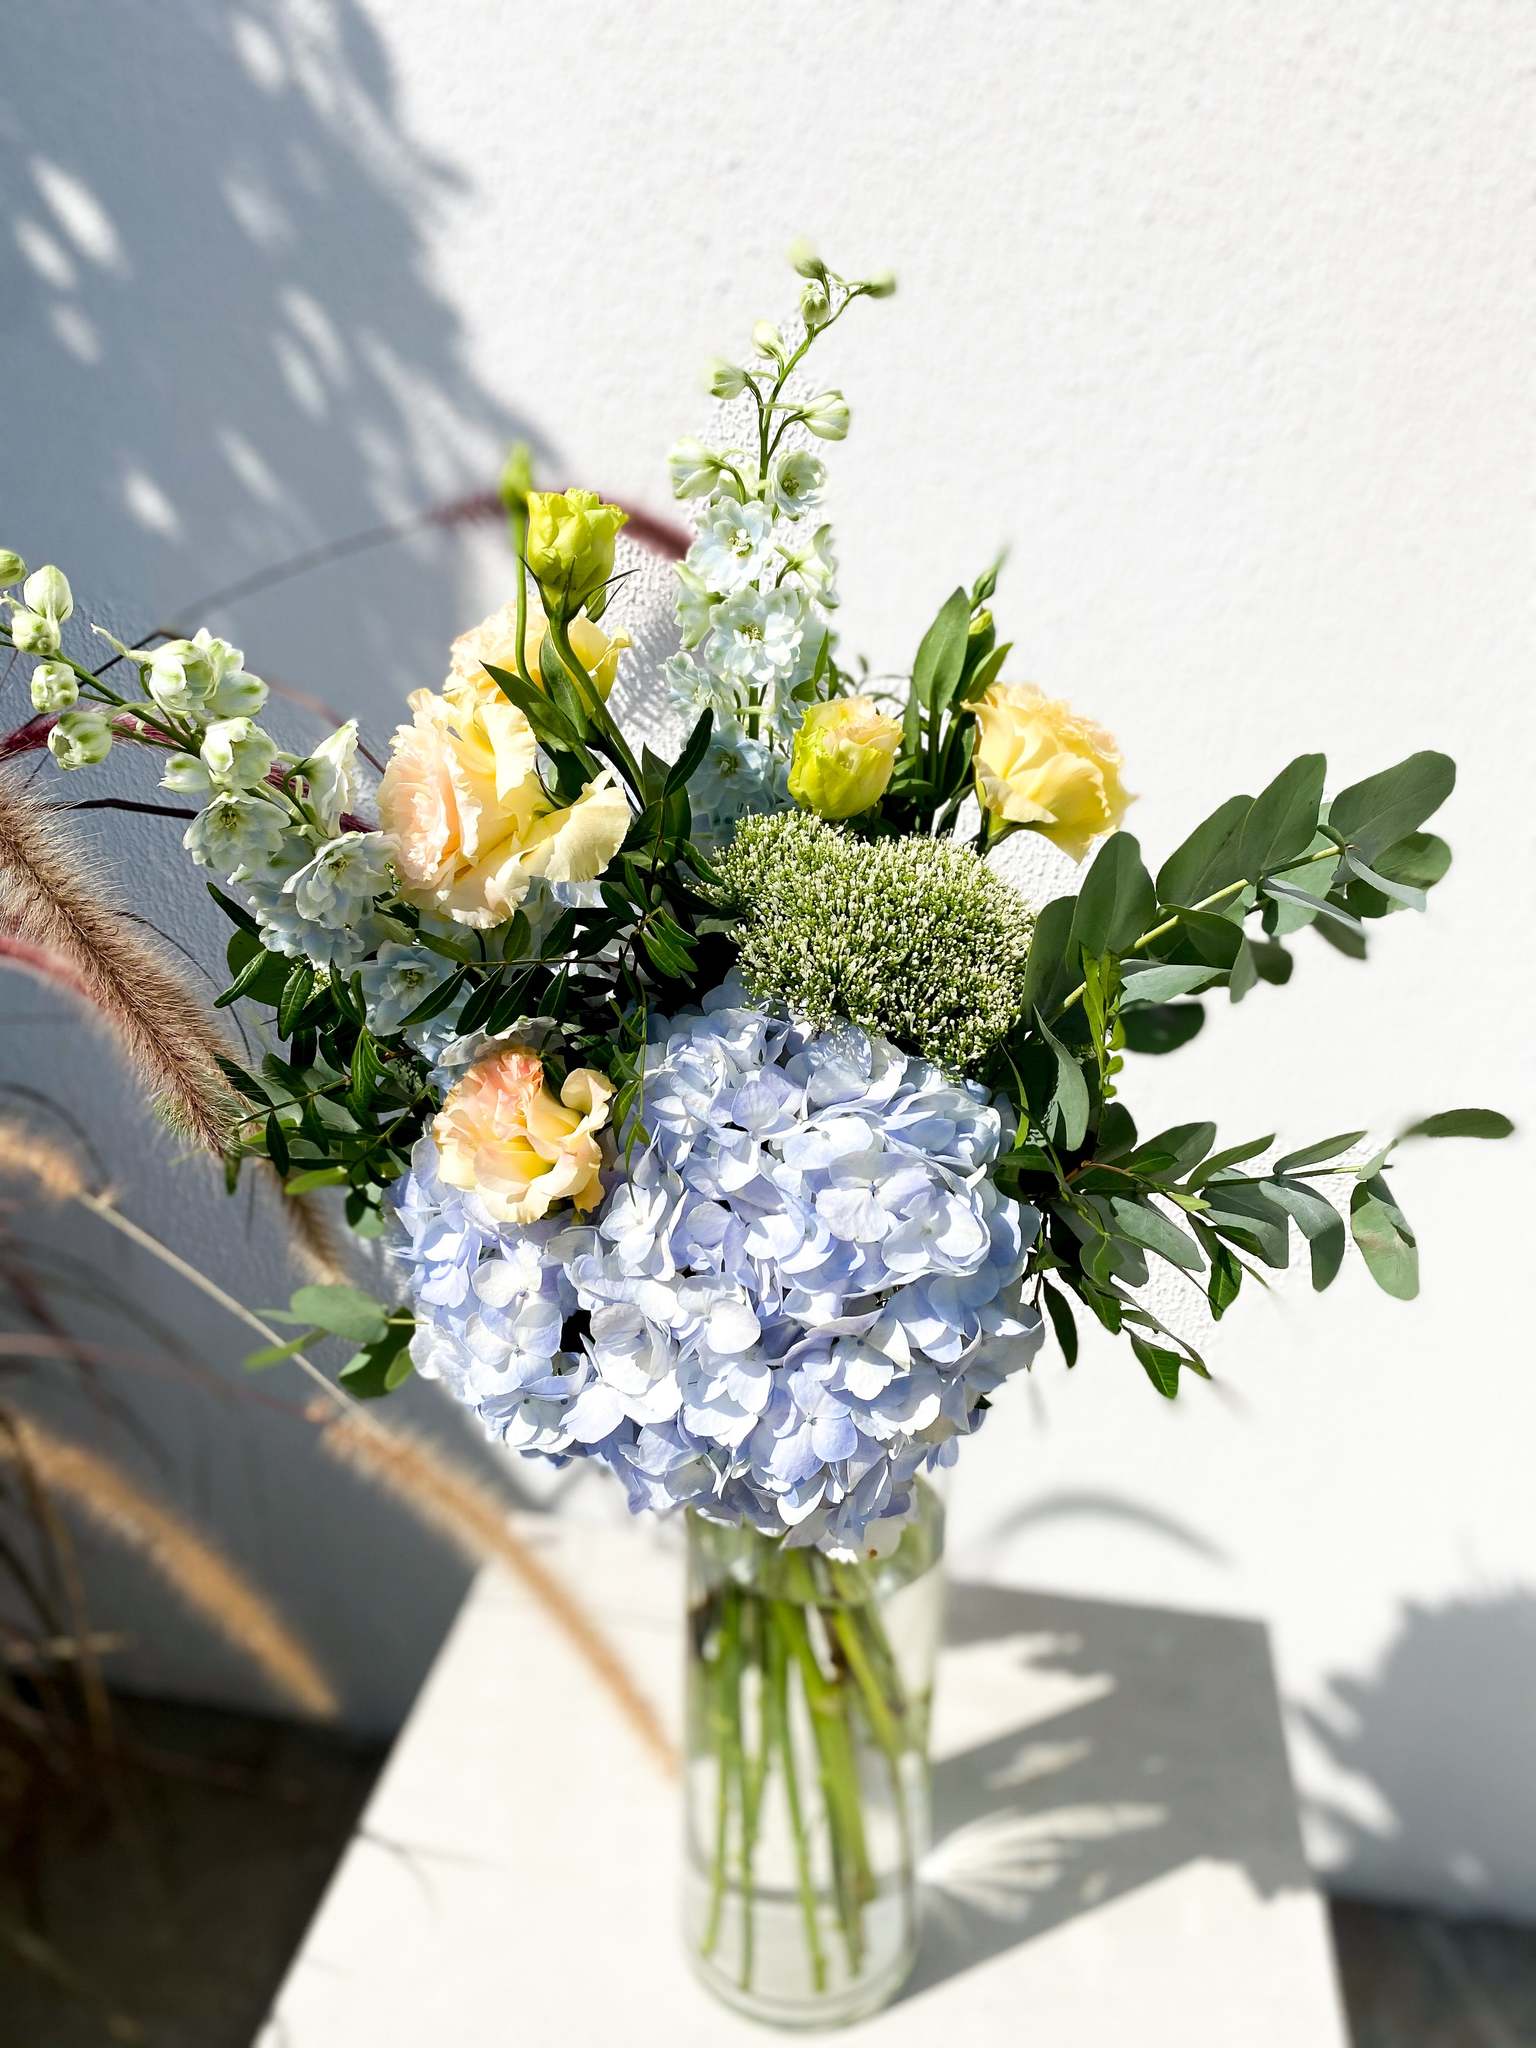 Valentine bouquet by Margot Floral Design. A fresh flower bouquet composed of Pale Yellow Roses, White Delphinium, Blue Hydrangea, and Eucalyptus. Small Size.